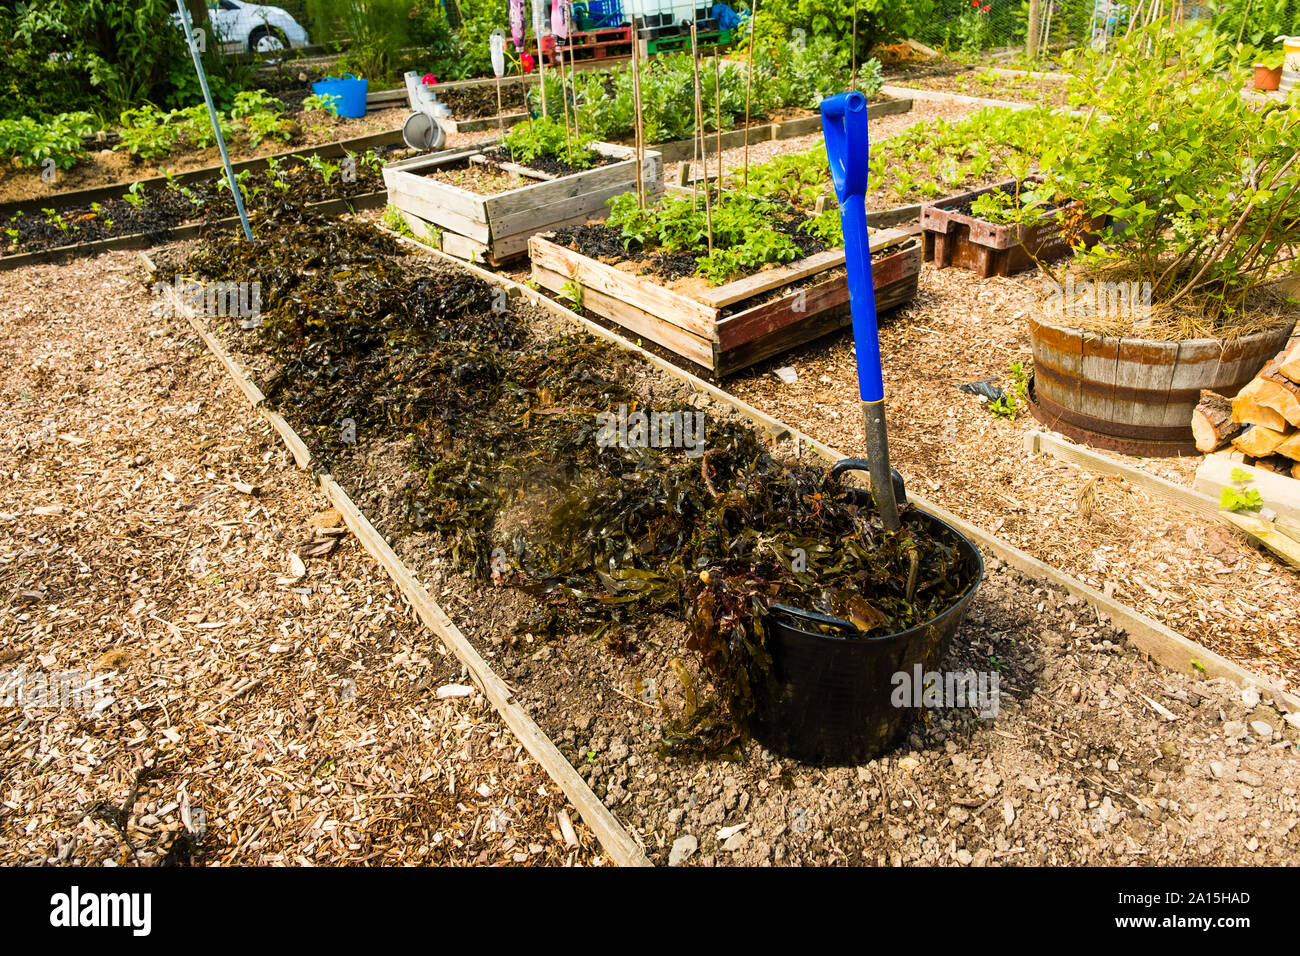 Allotment gardening in the UK - seaweed used as a mulch and fertilizer on raised beds Stock Photo